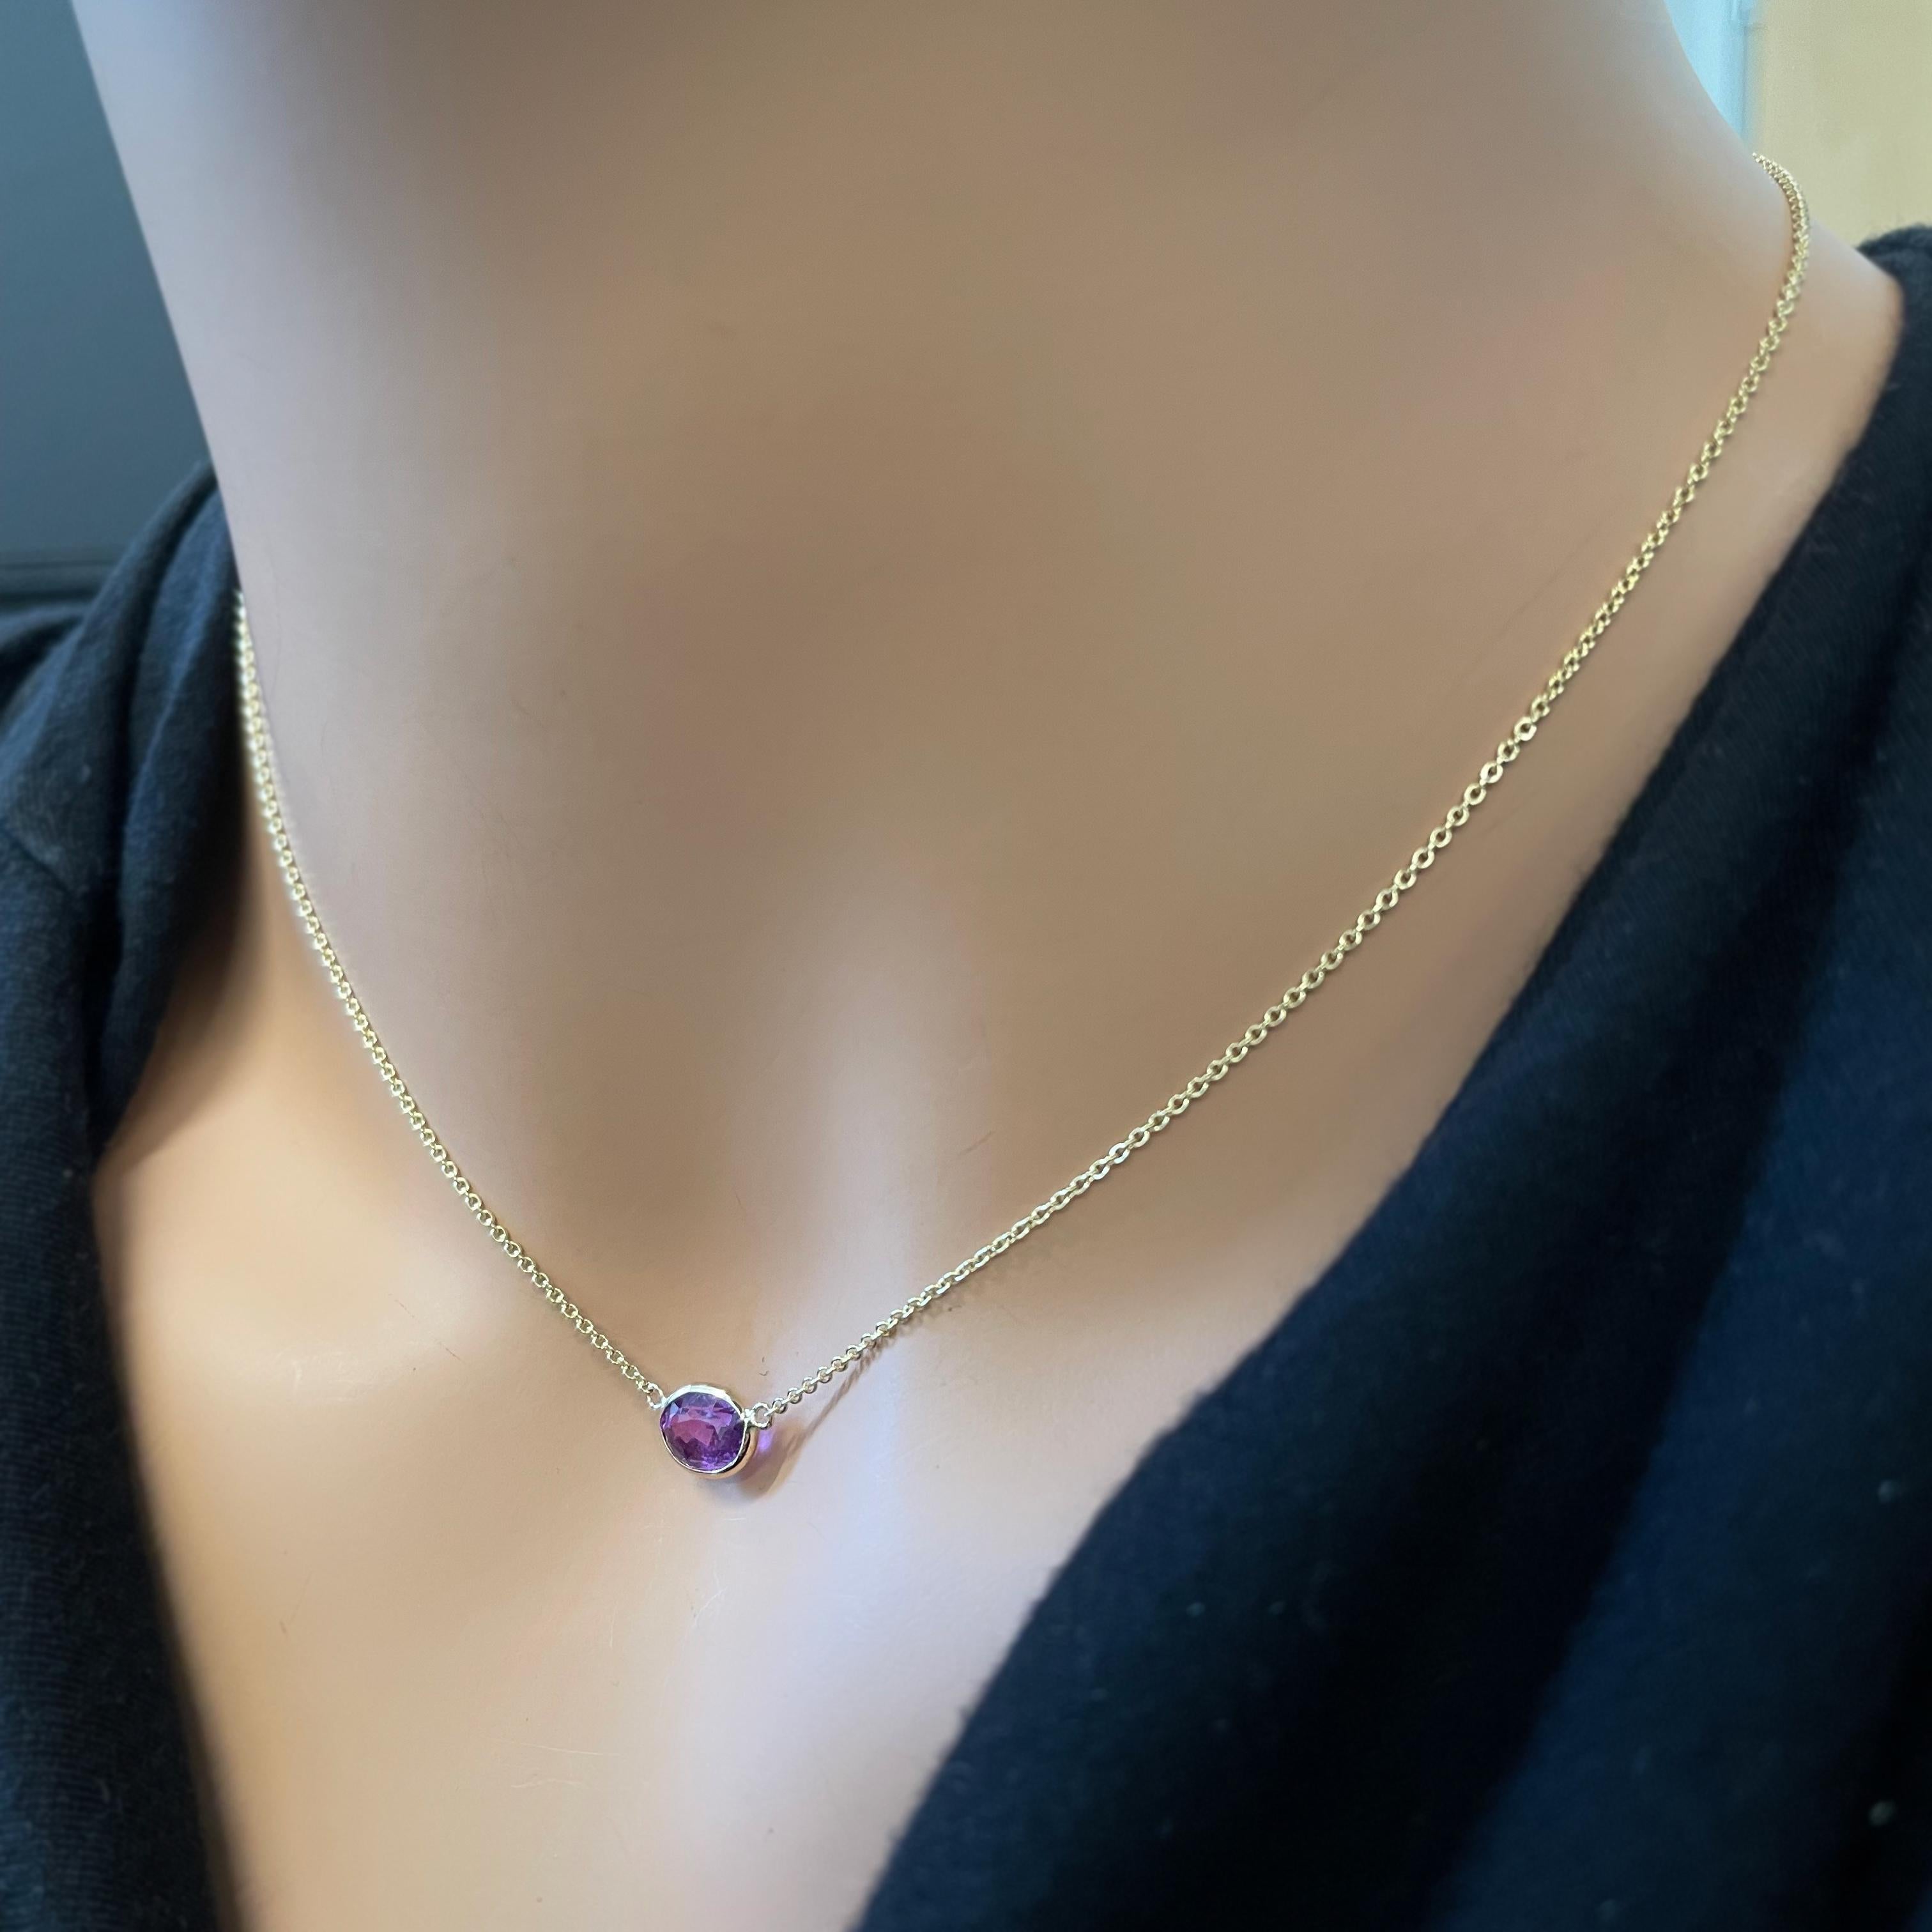 The 0.85 carat Cushion Cut Red Ruby Necklace in 14K Yellow Gold is a dazzling piece of jewelry that exudes both sophistication and passion. At the heart of this necklace is a stunning red ruby, known for its intense and romantic hue, with a total